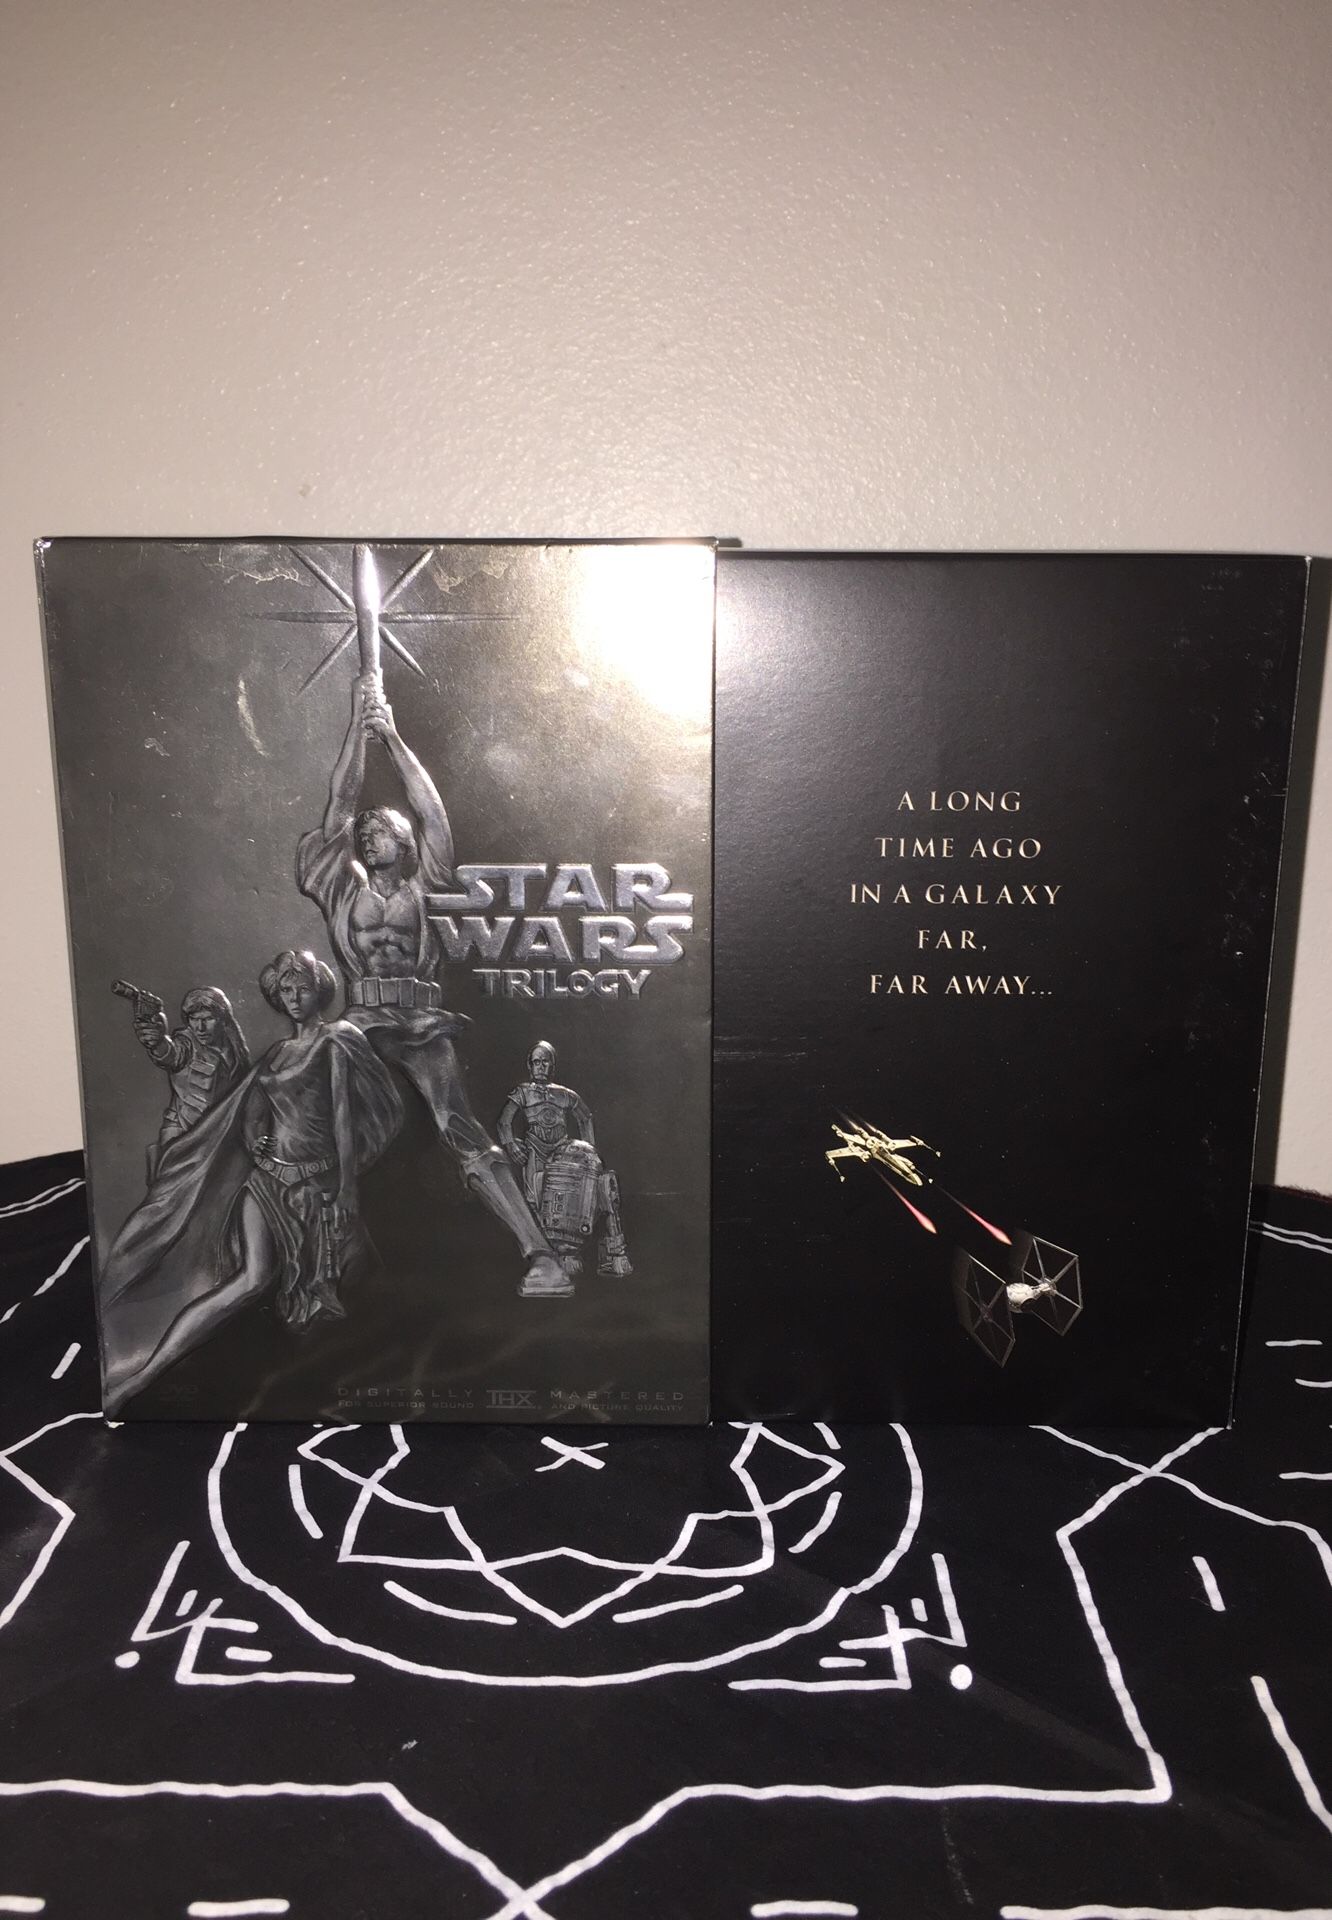 Star Wars limited edition trilogy